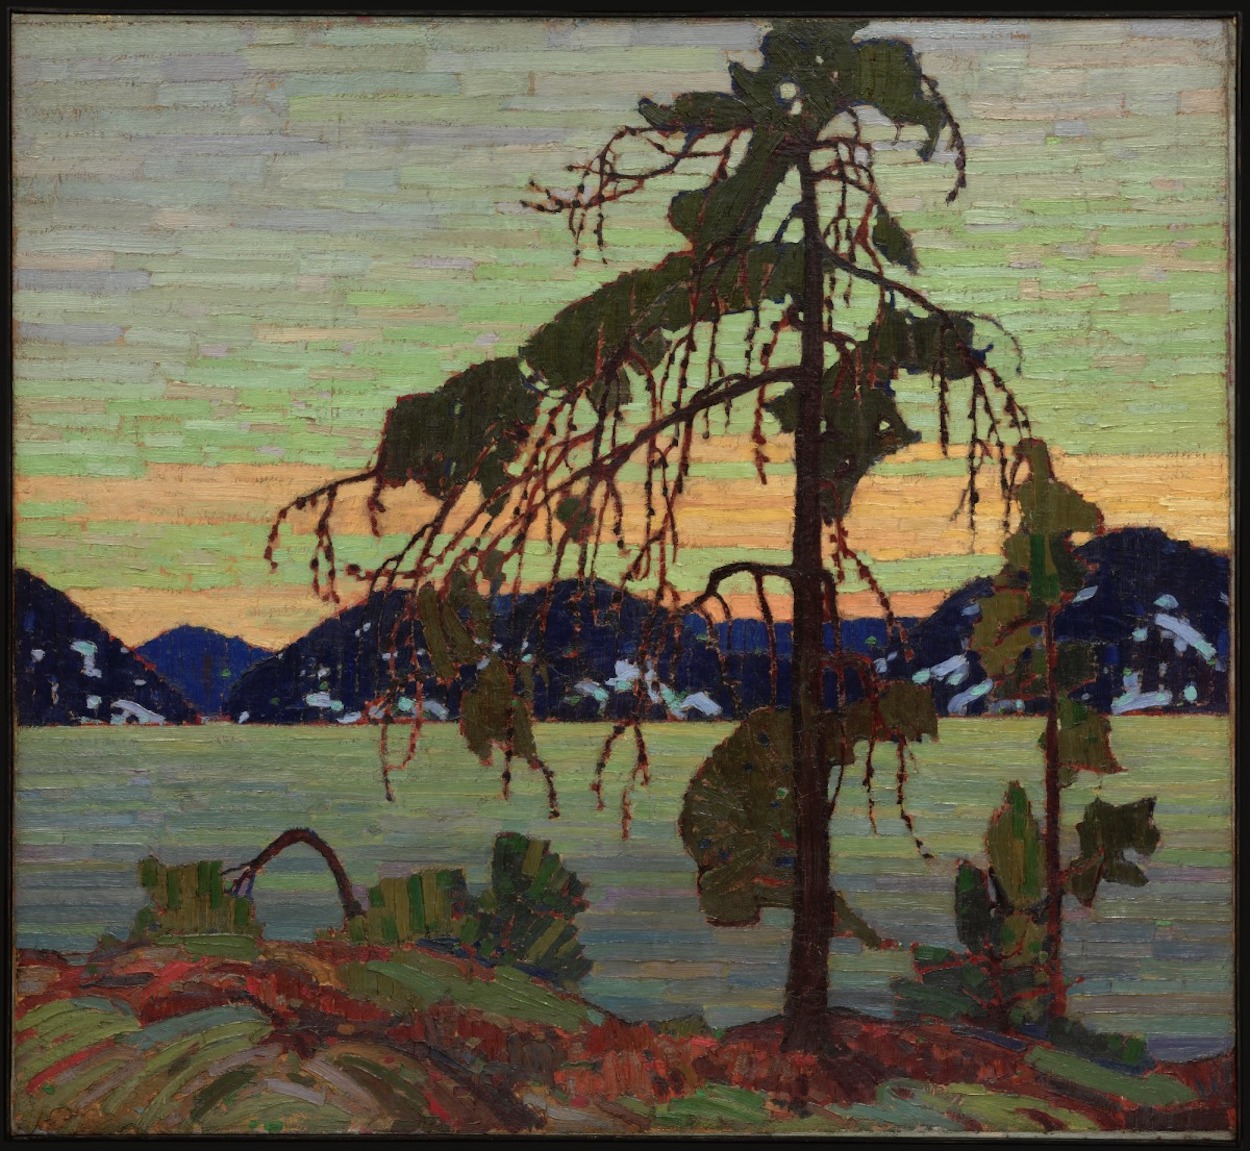 The Jack Pine by Tom Thomson - 1916–17 - 127.9 × 139.8 cm National Gallery of Canada